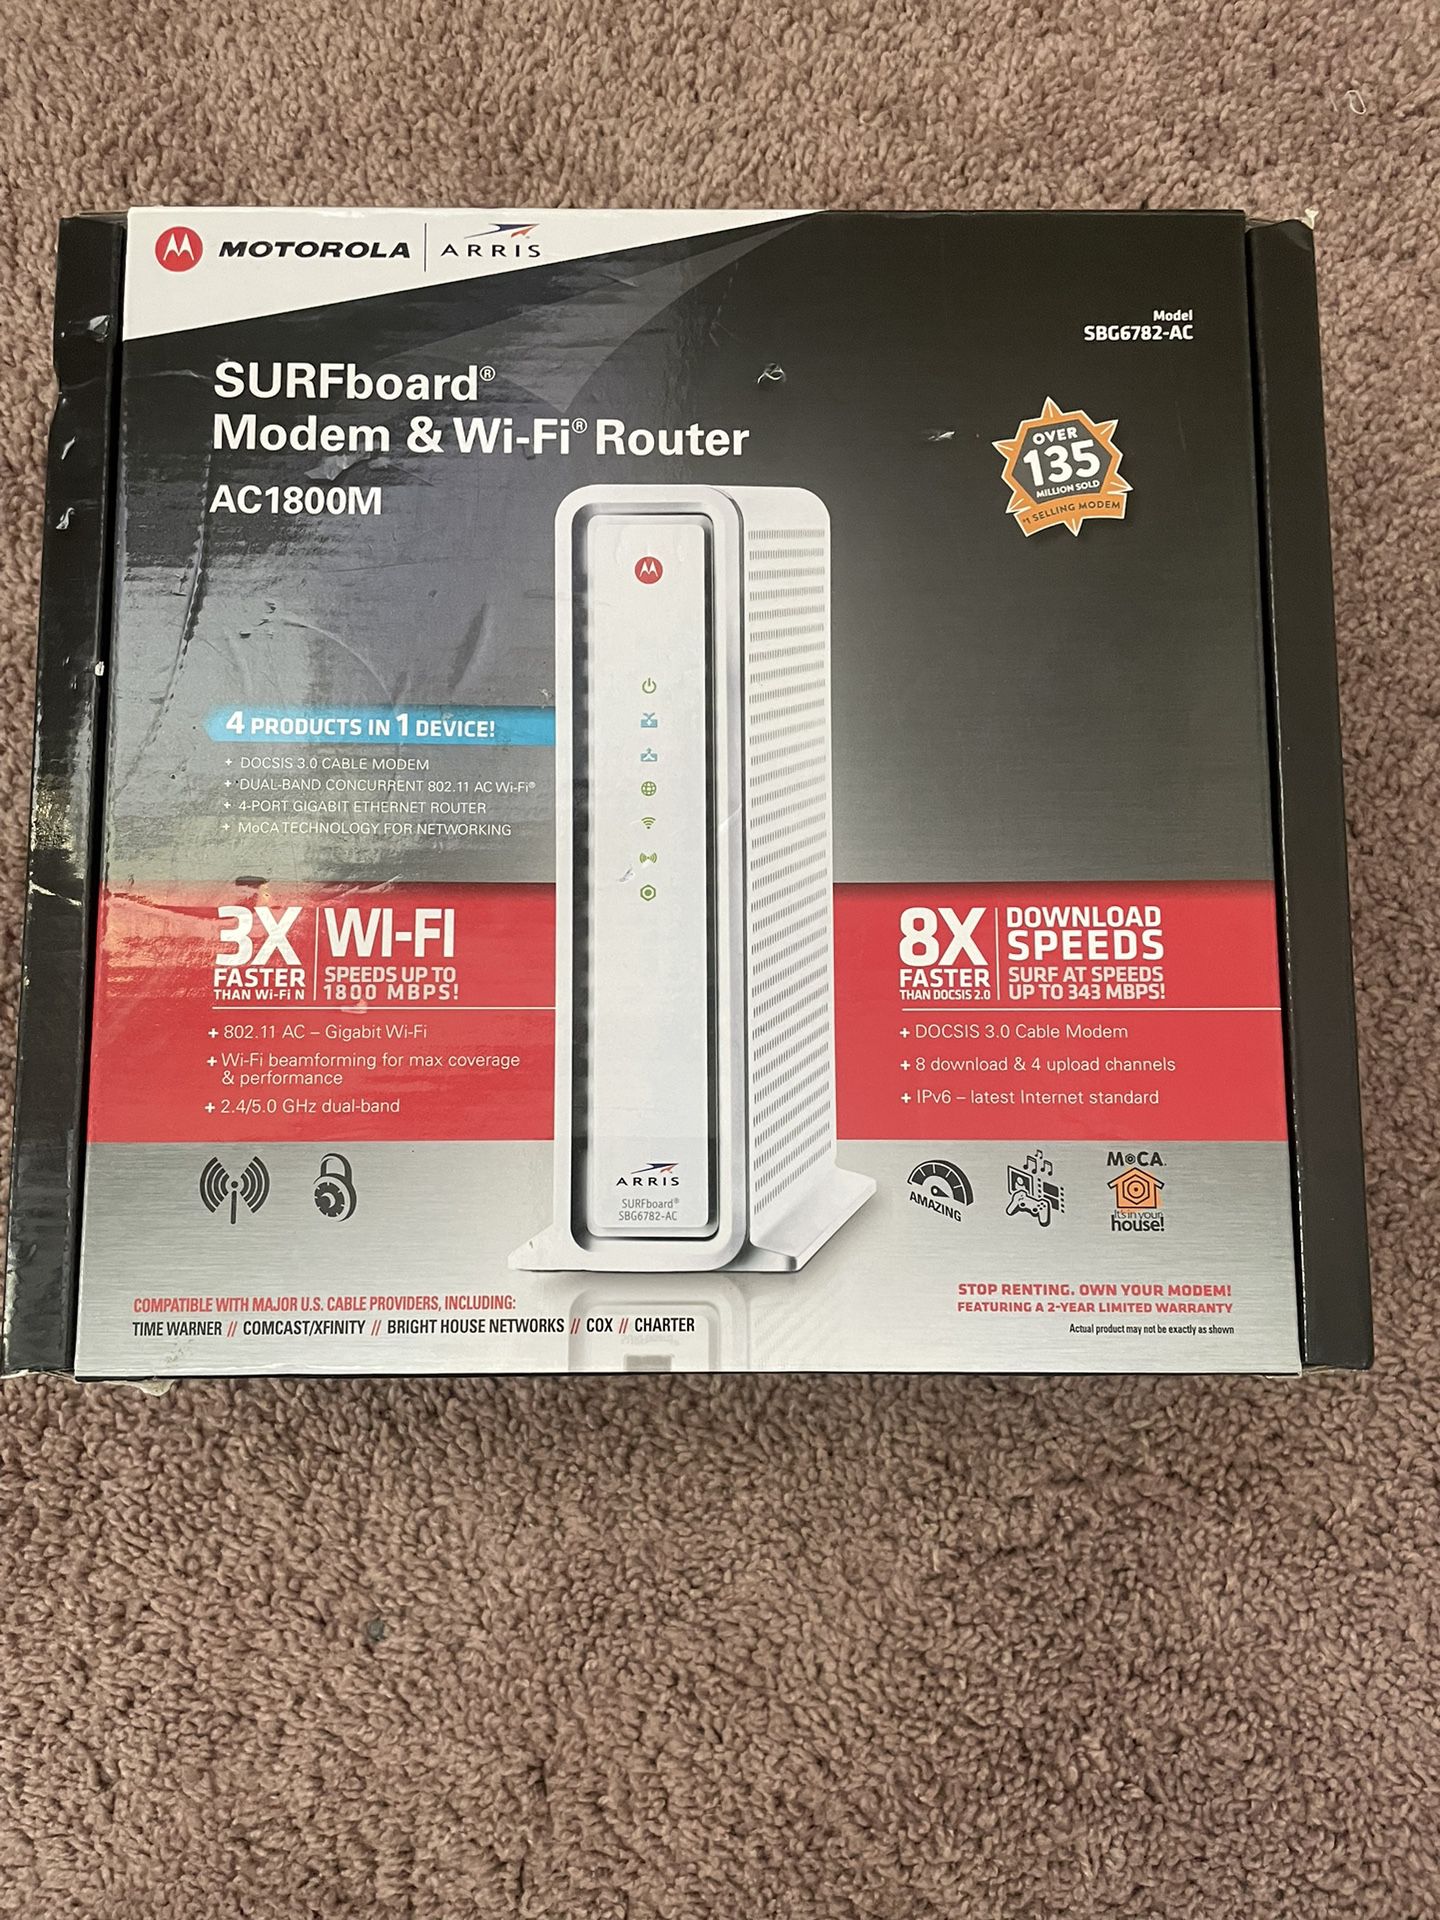 Motorola ARRIS SBG6782-AC 1800M SURFboard DOCSIS 3.0 Modem & Wi-Fi Router  Open box like new condition  The Motorola ARRIS SBG6782-AC 1800M SURFboard 